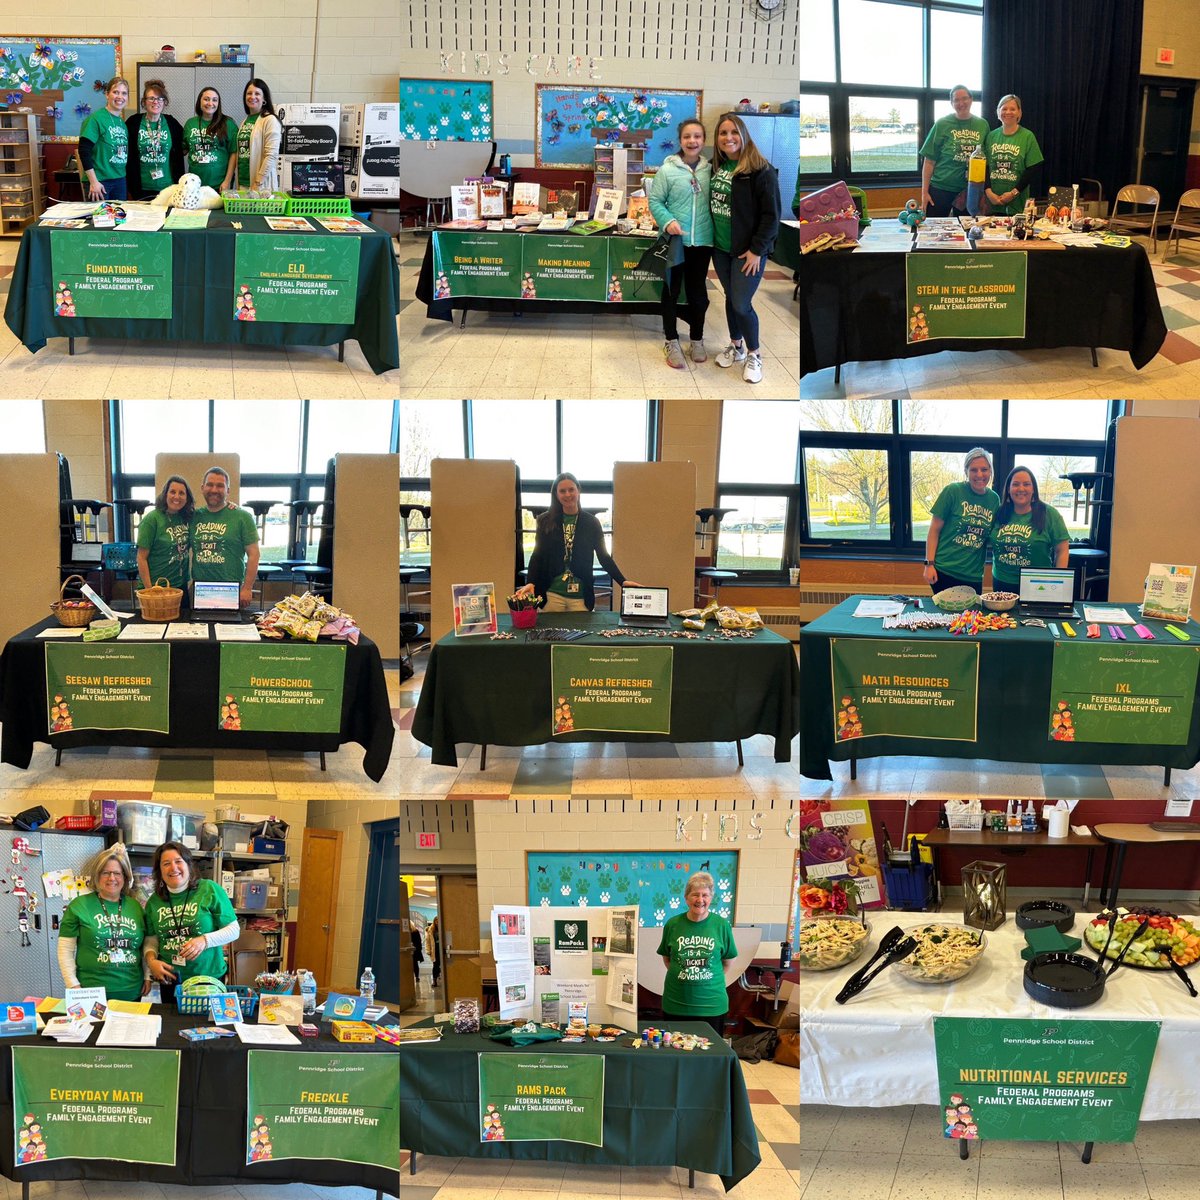 Last night @PennridgeSD hosted its annual Title I Parent Workshop and Resource Night. It was a success and couldn’t be done without the work of our teachers, administration and community. #PennridgeProudEducators